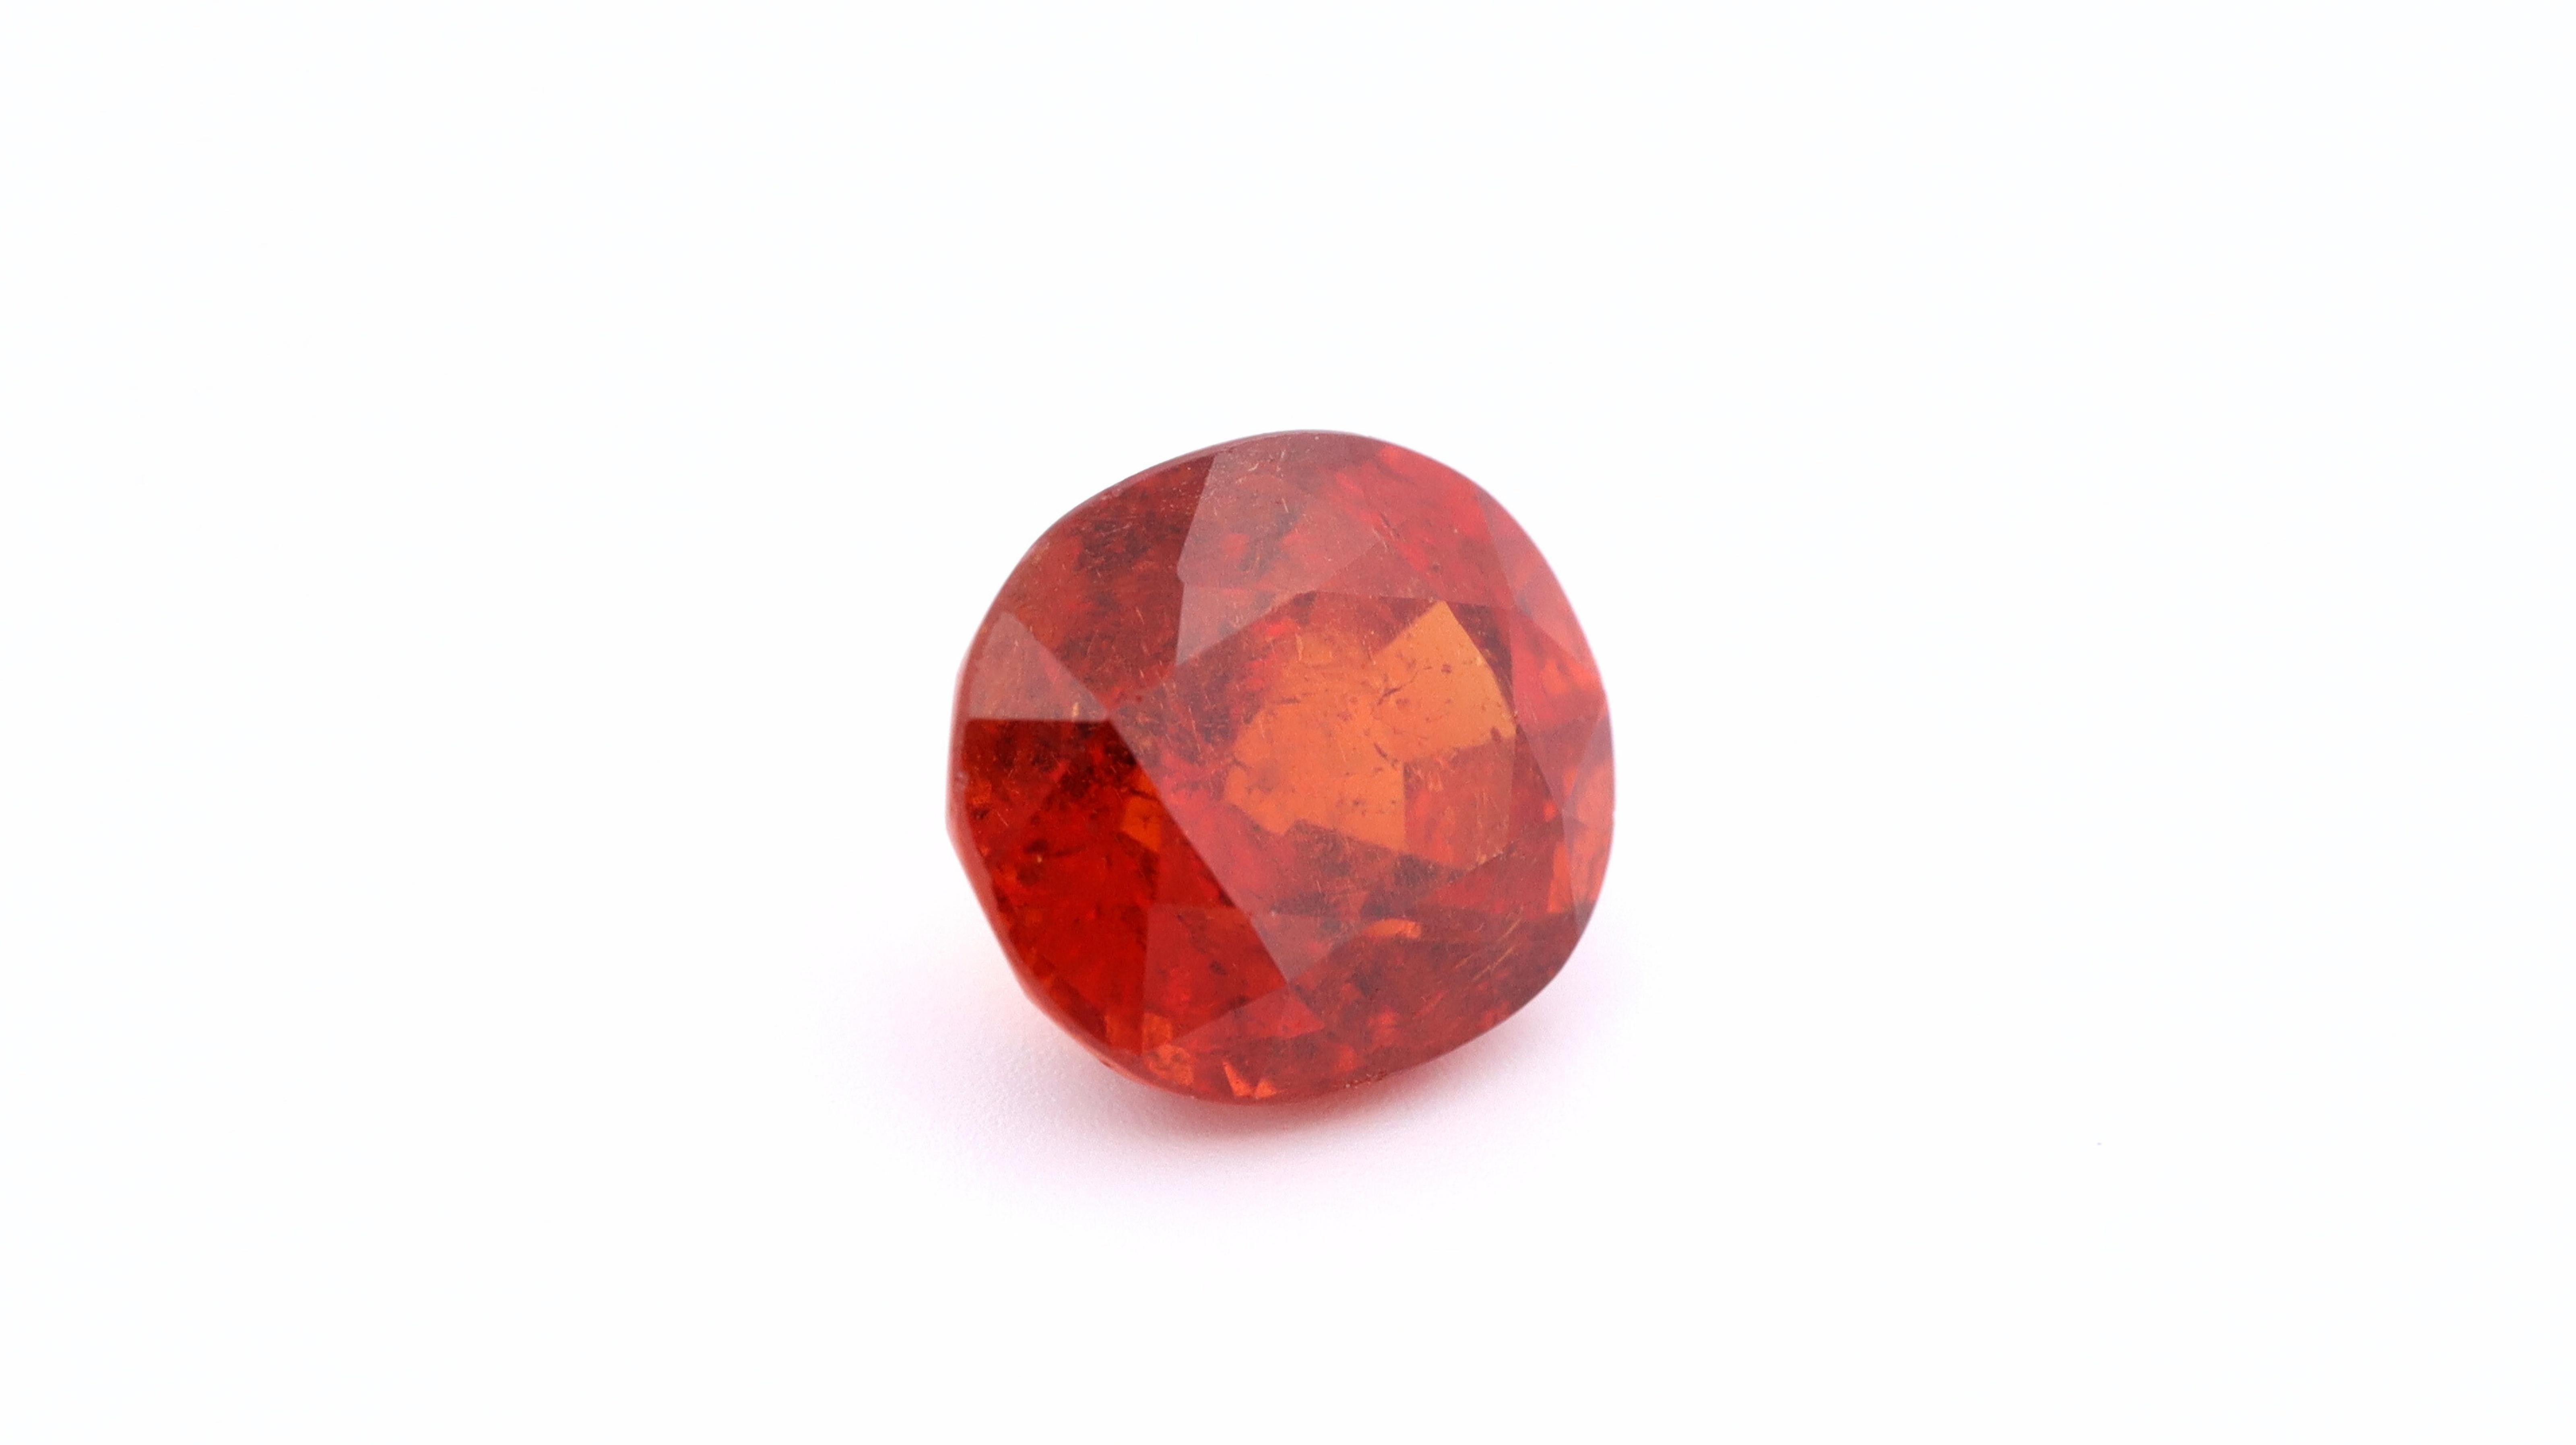 A natural Spessartine Garnet also known as Mandarin Garnet.

There are two well known varieties of orange garnets, Hessonite, which tends to be readily available and less hard, and Spessartine garnet, as this stone, which is rare and highly desired